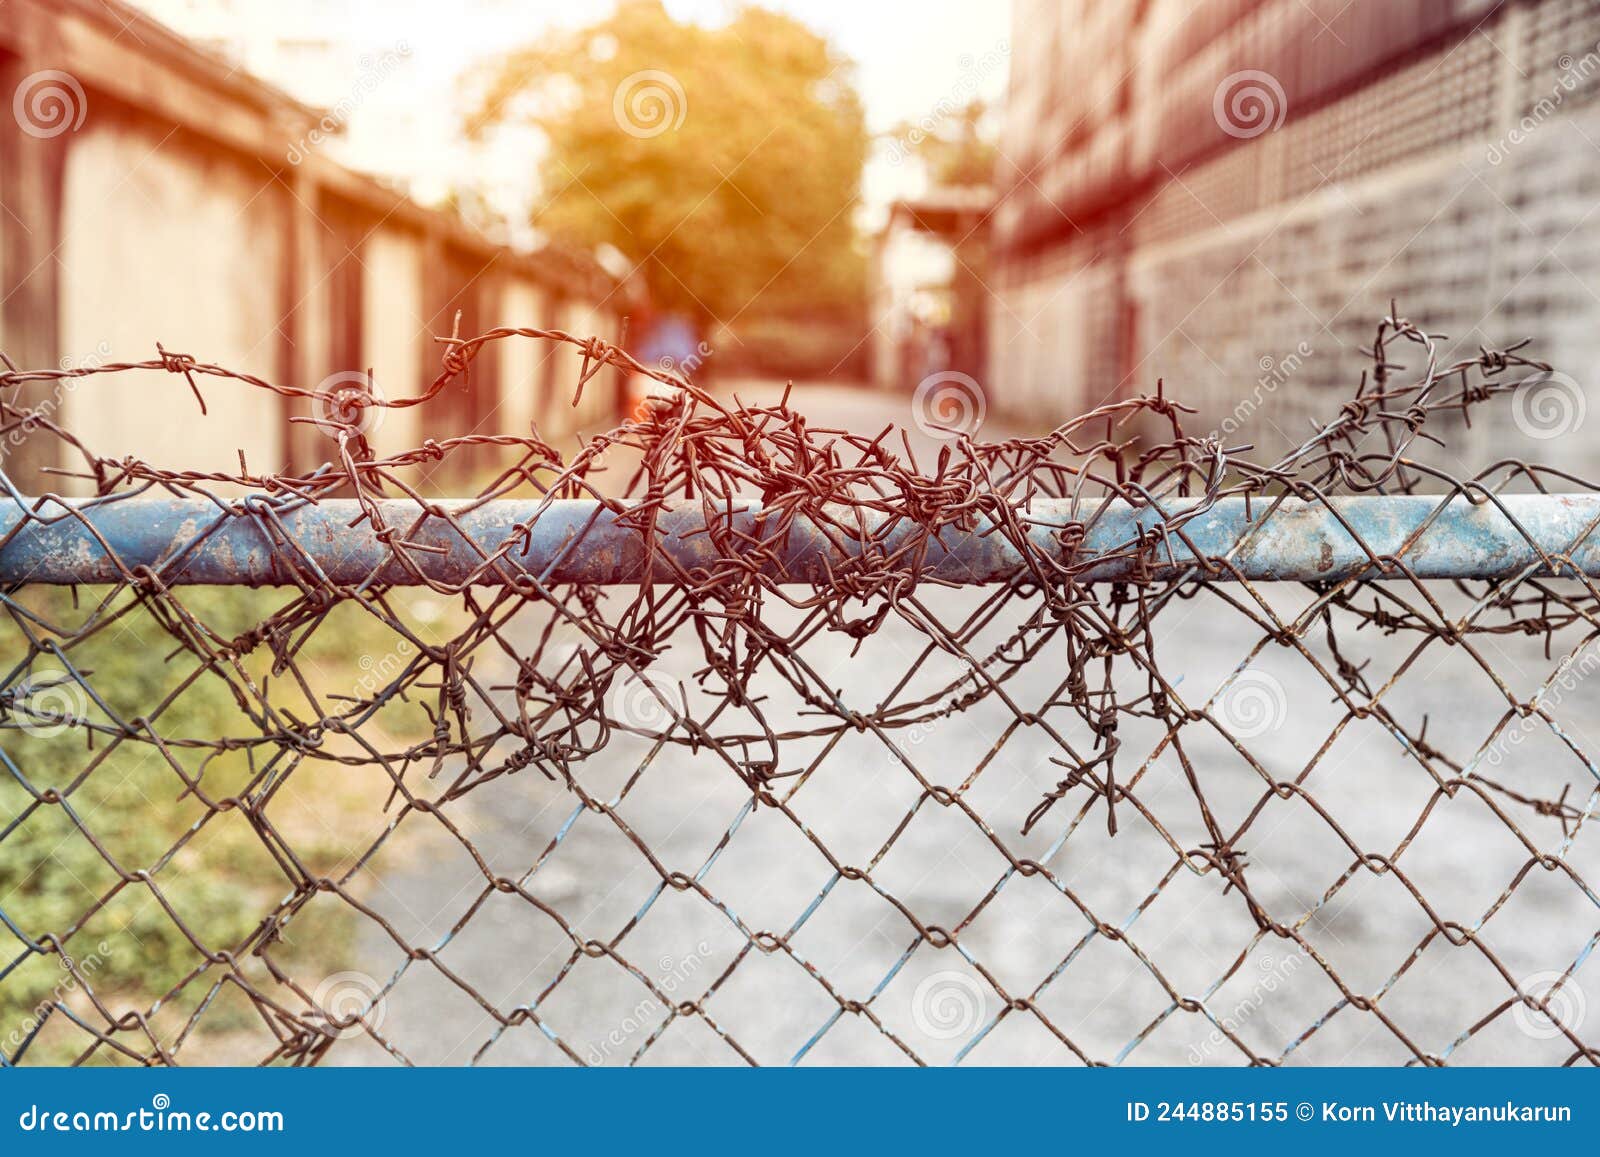 barbed wire entrance fences prevent intruders from entering restricted areas